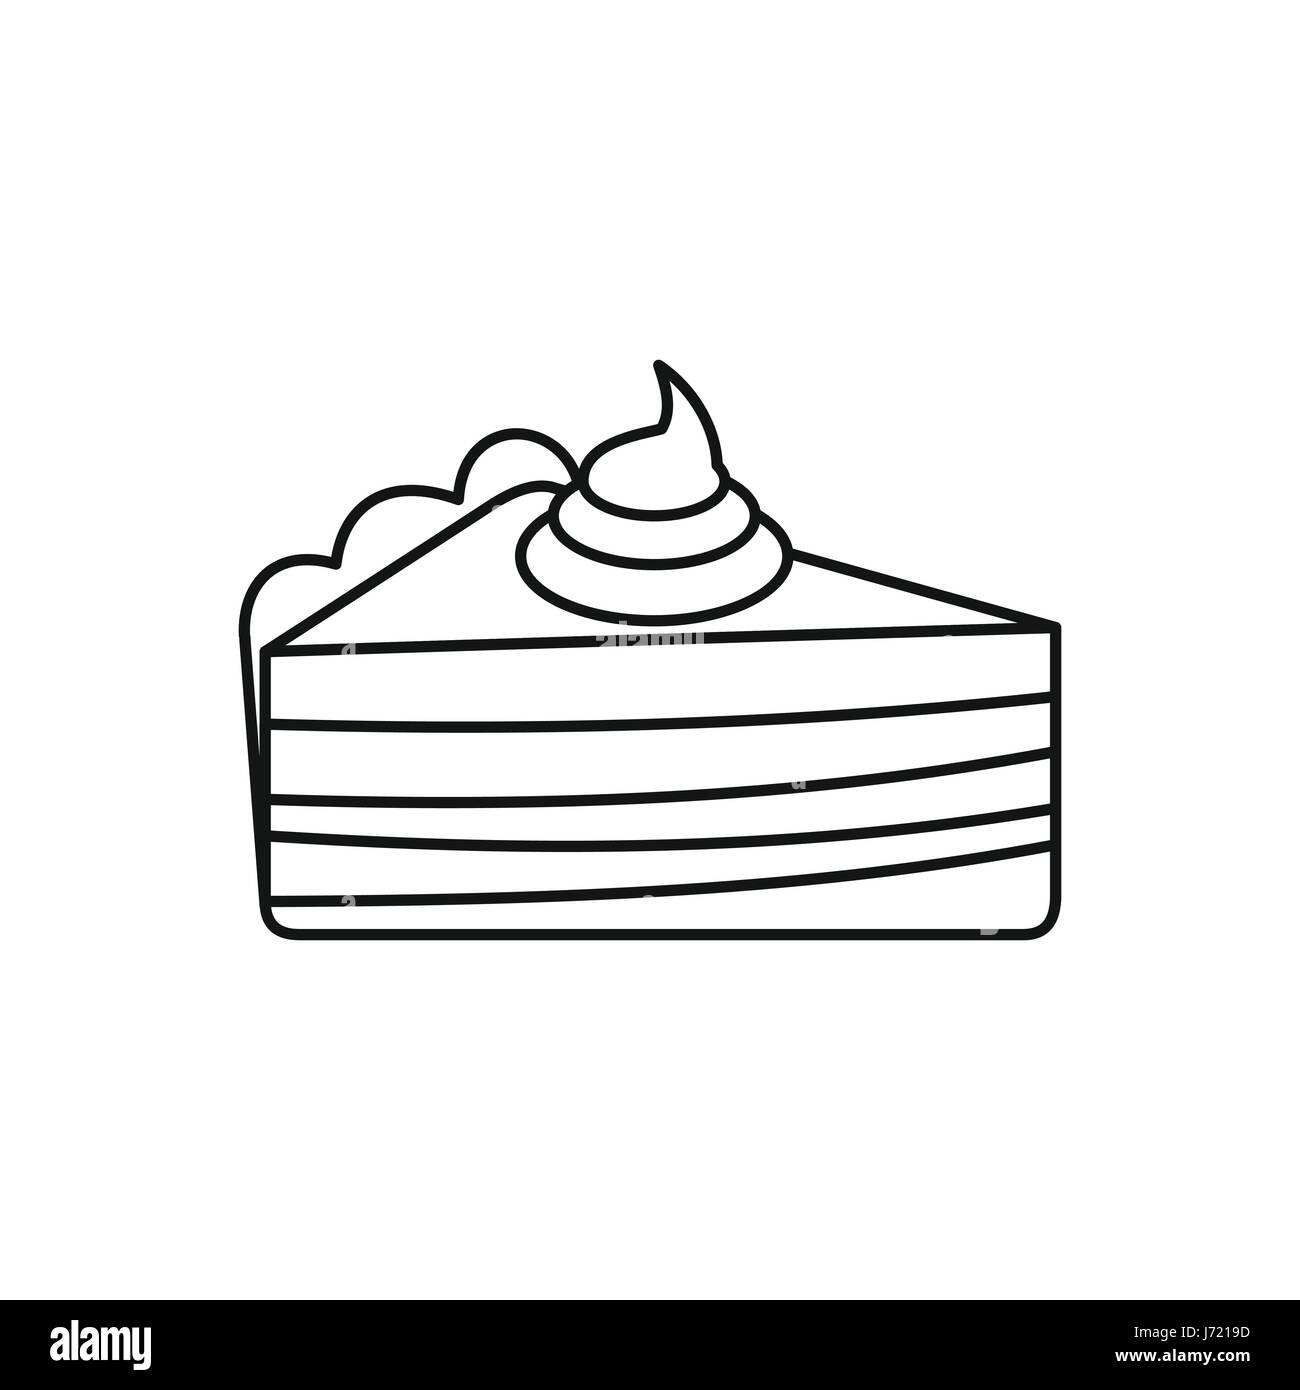 Cake Outline Printable - Colour In Cake - Free Transparent PNG Clipart  Images Download